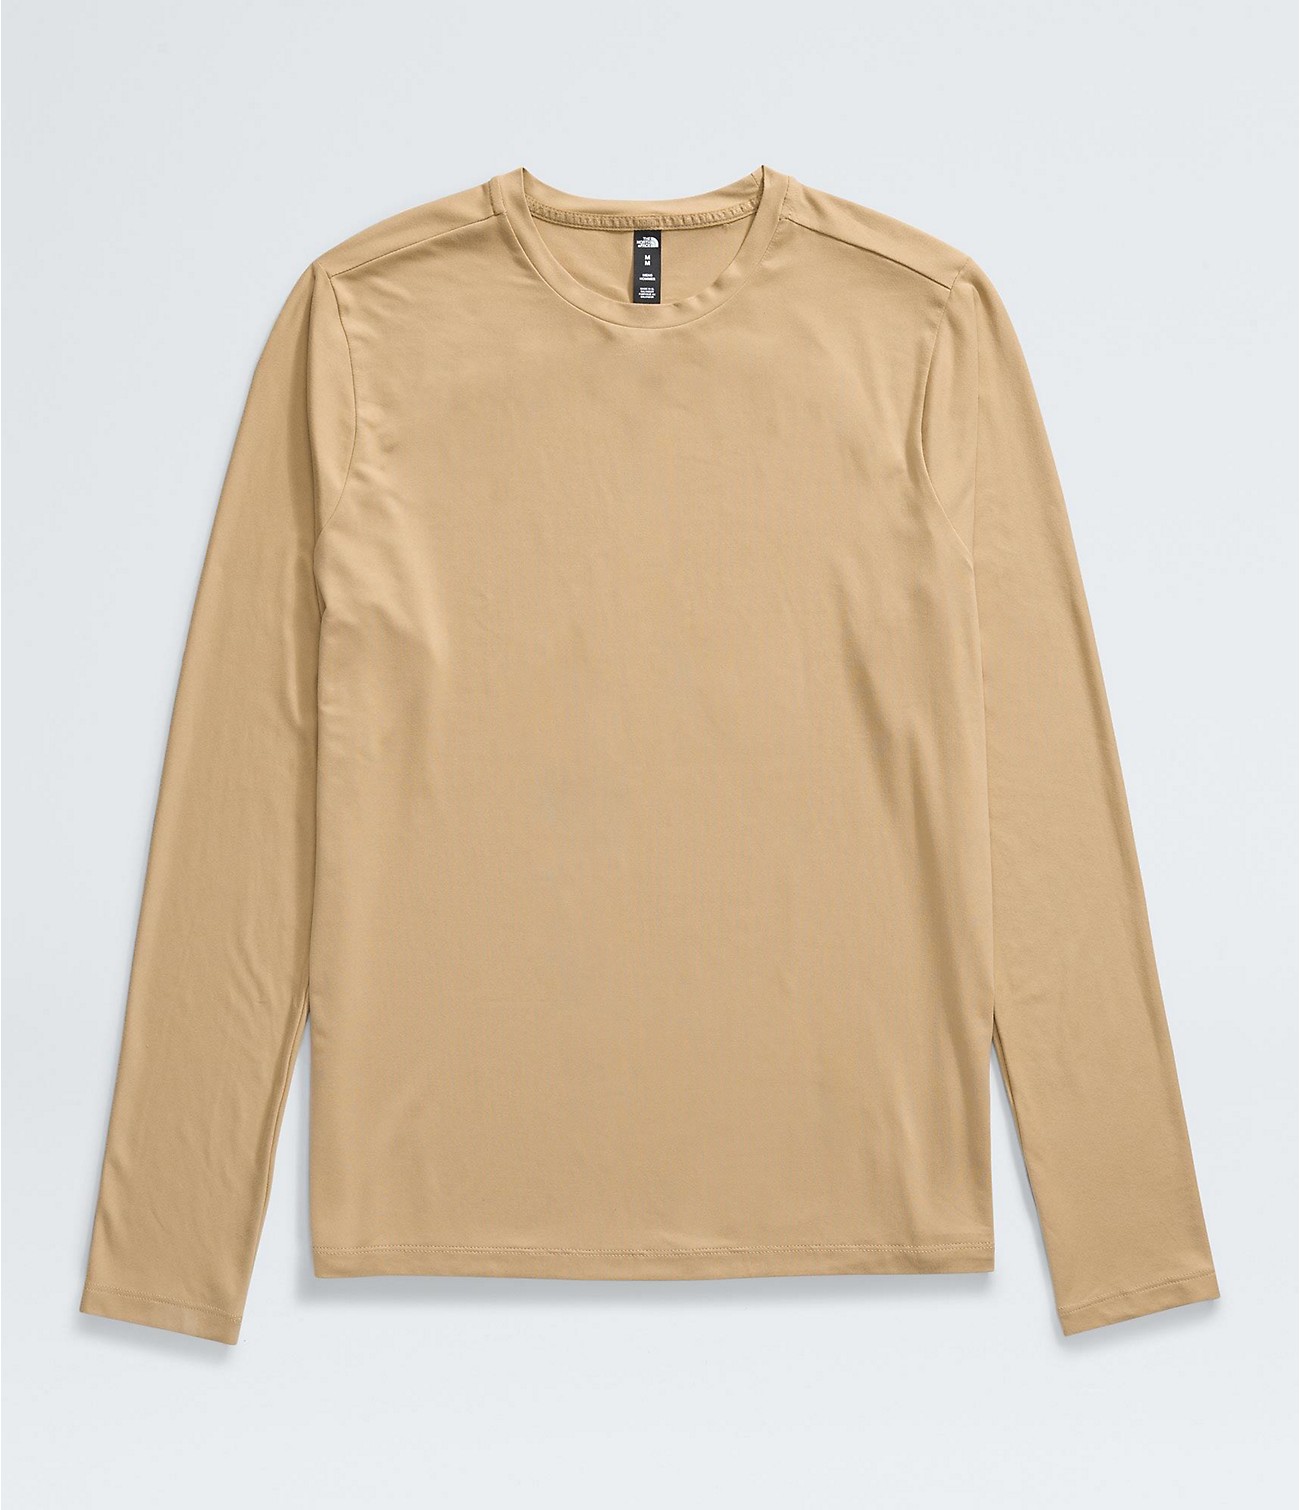 Men’s Dune Sky Long-Sleeve Crew | The North Face